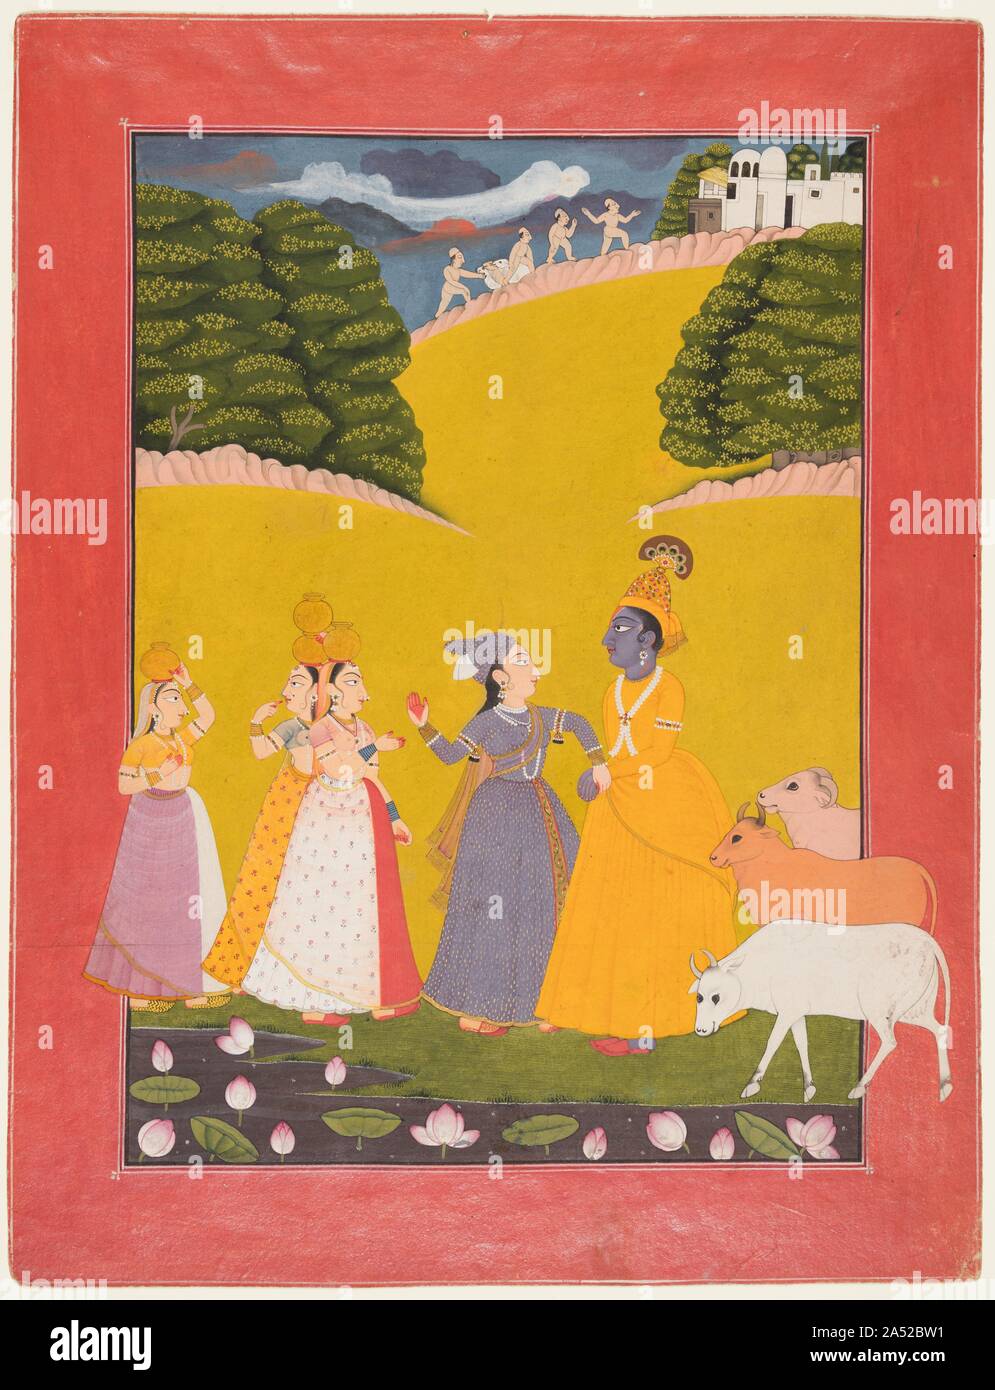 Taking of the Toll, Dana-lila, c. 1760. The god Krishna has stopped the cowherd women on their way to bring milk and yogurt to the Brahmin priests. He pretends that he is a landowner and is demanding a toll tax from the women. His lover Radha playfully raises her hand to smack him. Both Radha and Krishna wear conical headdresses associated with minority groups in the western Himalayas, which visually relocates them to Chamba where this painting was made. In the background herdsmen coax the cows to move along&#x2014;work that Krishna should be doing instead of flirting with the women. Stock Photo